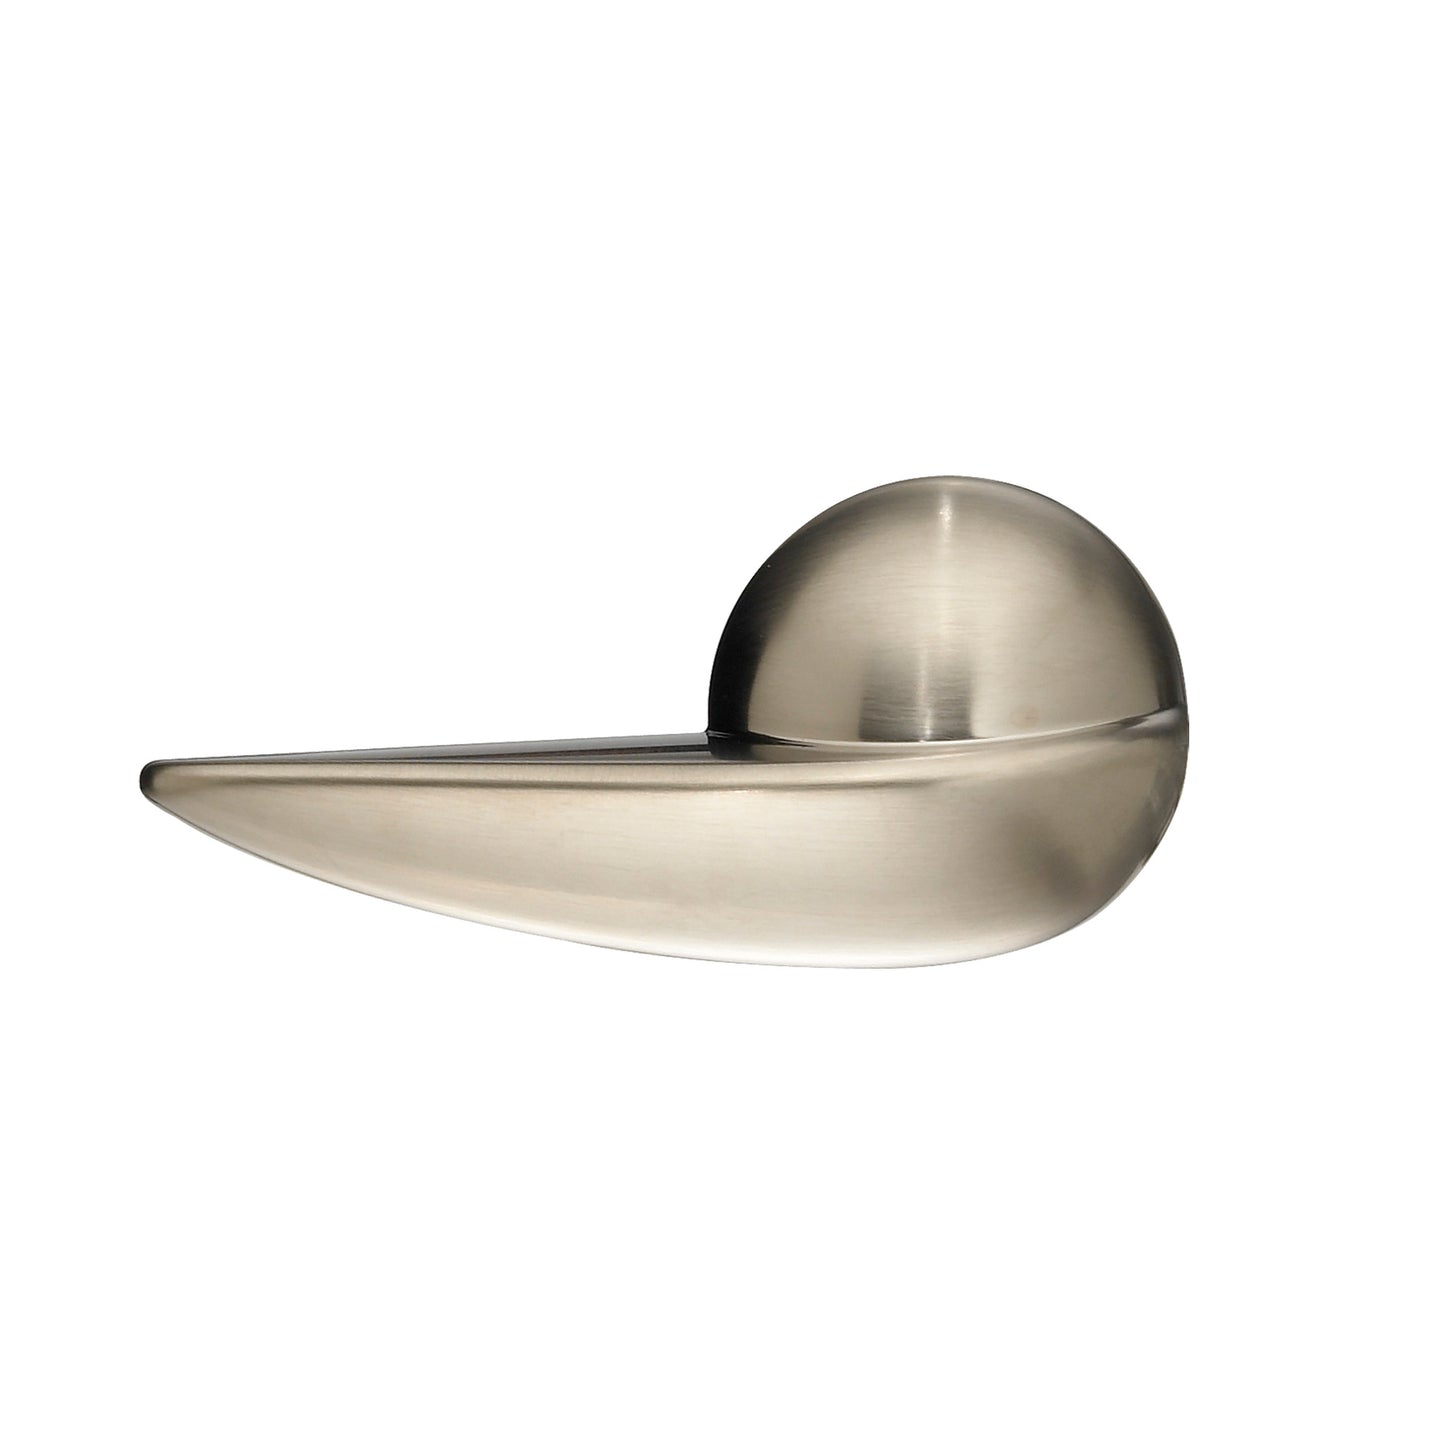 738903-2950A - Left-Hand Trip Lever for Cadet 3 Toilets - Brushed Nickel